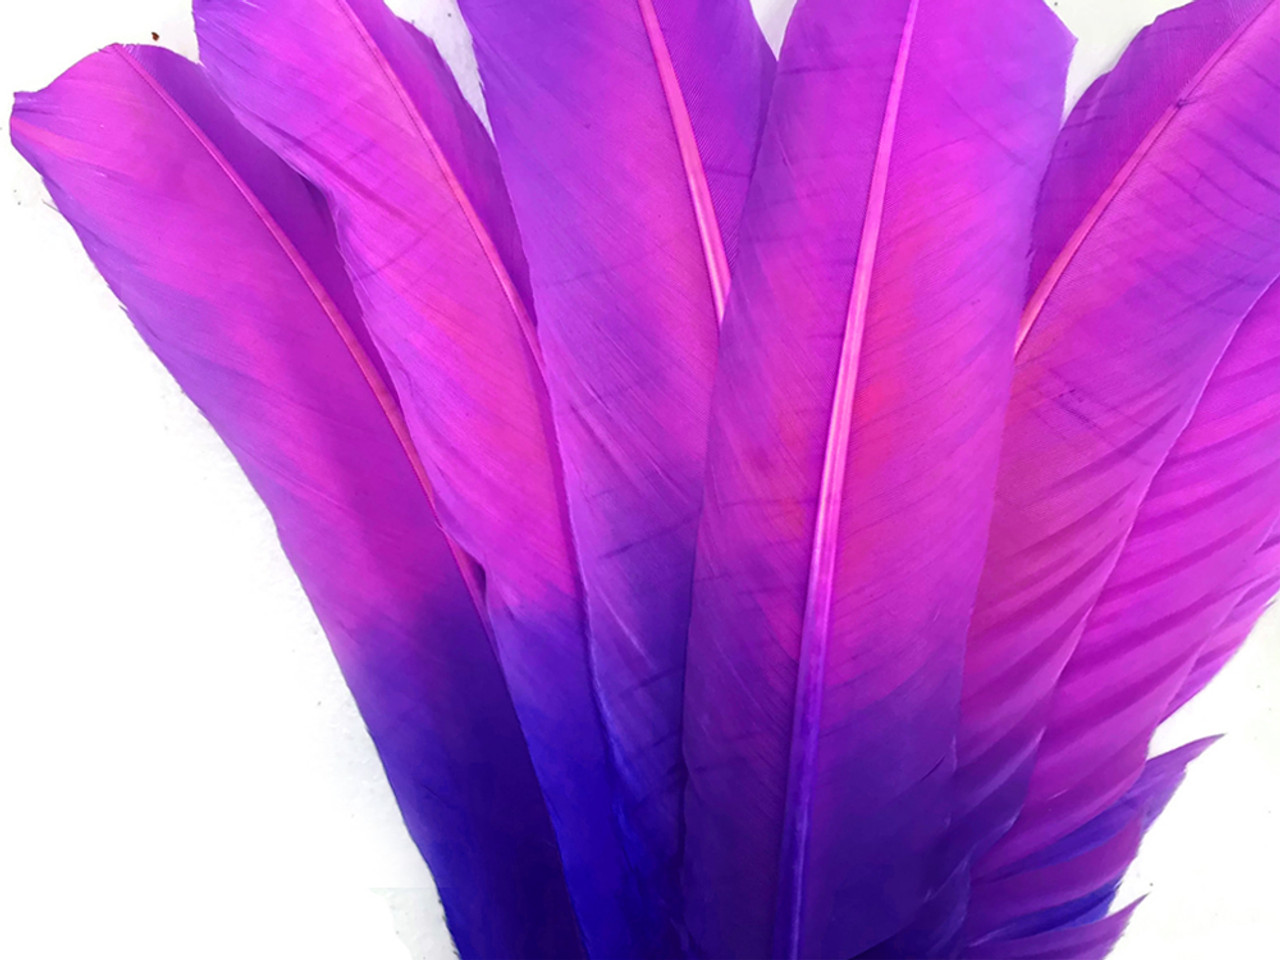 6-Piece Pink and Purple Turkey Quill Feathers